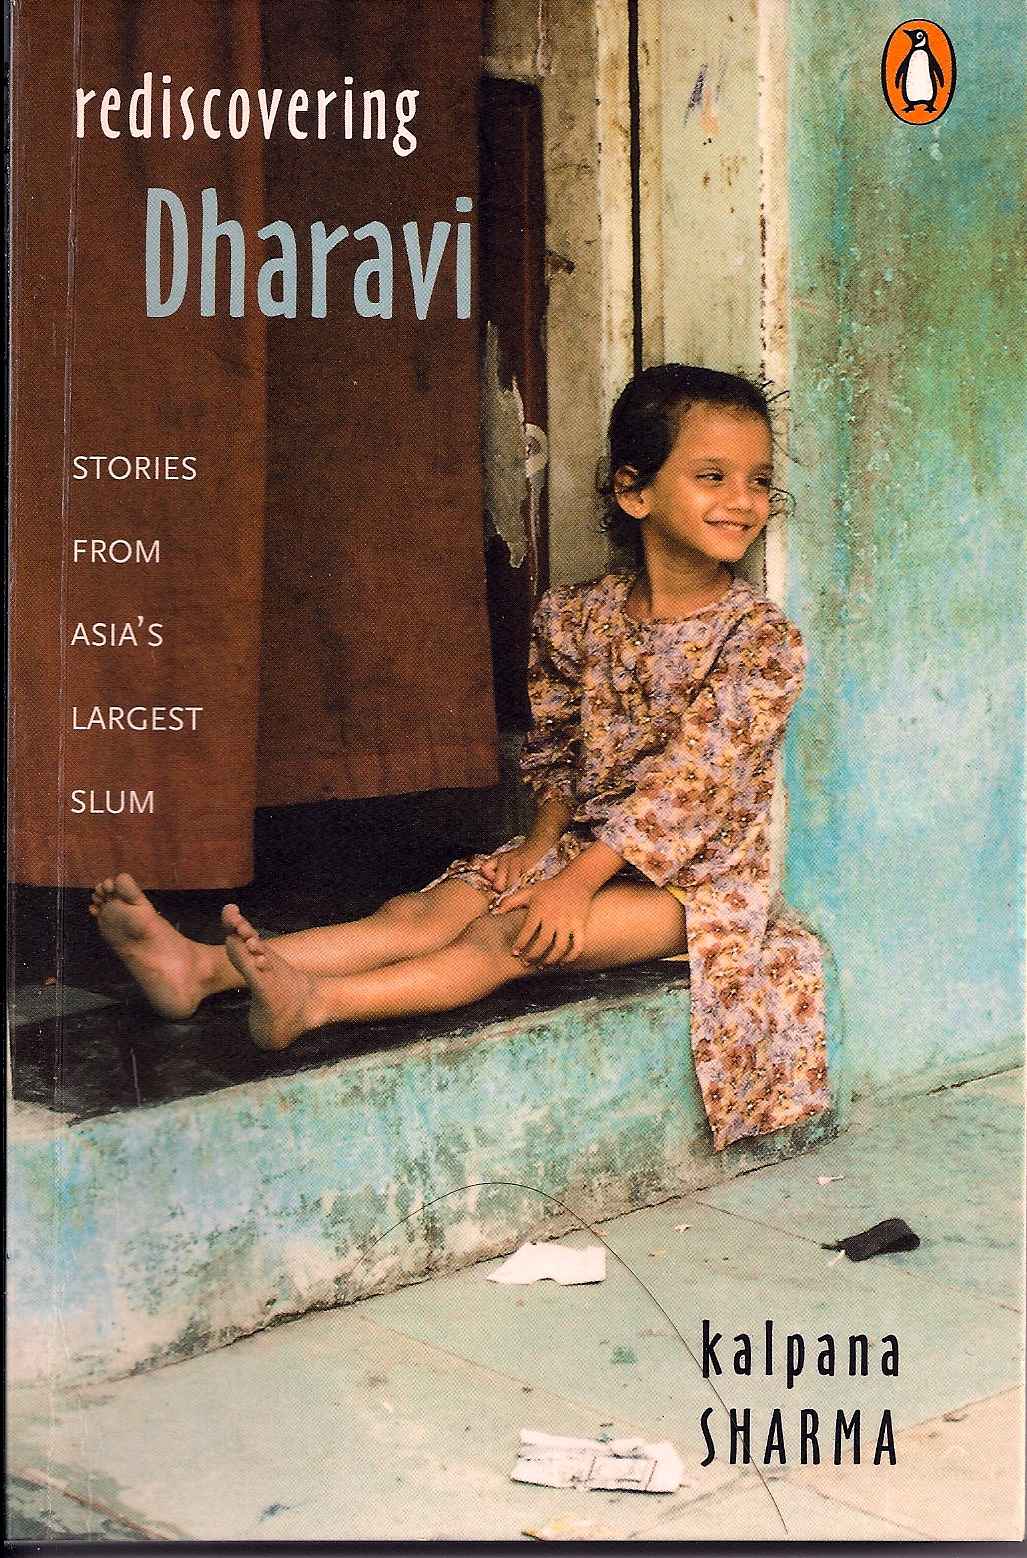 More about Rediscovering Dharavi